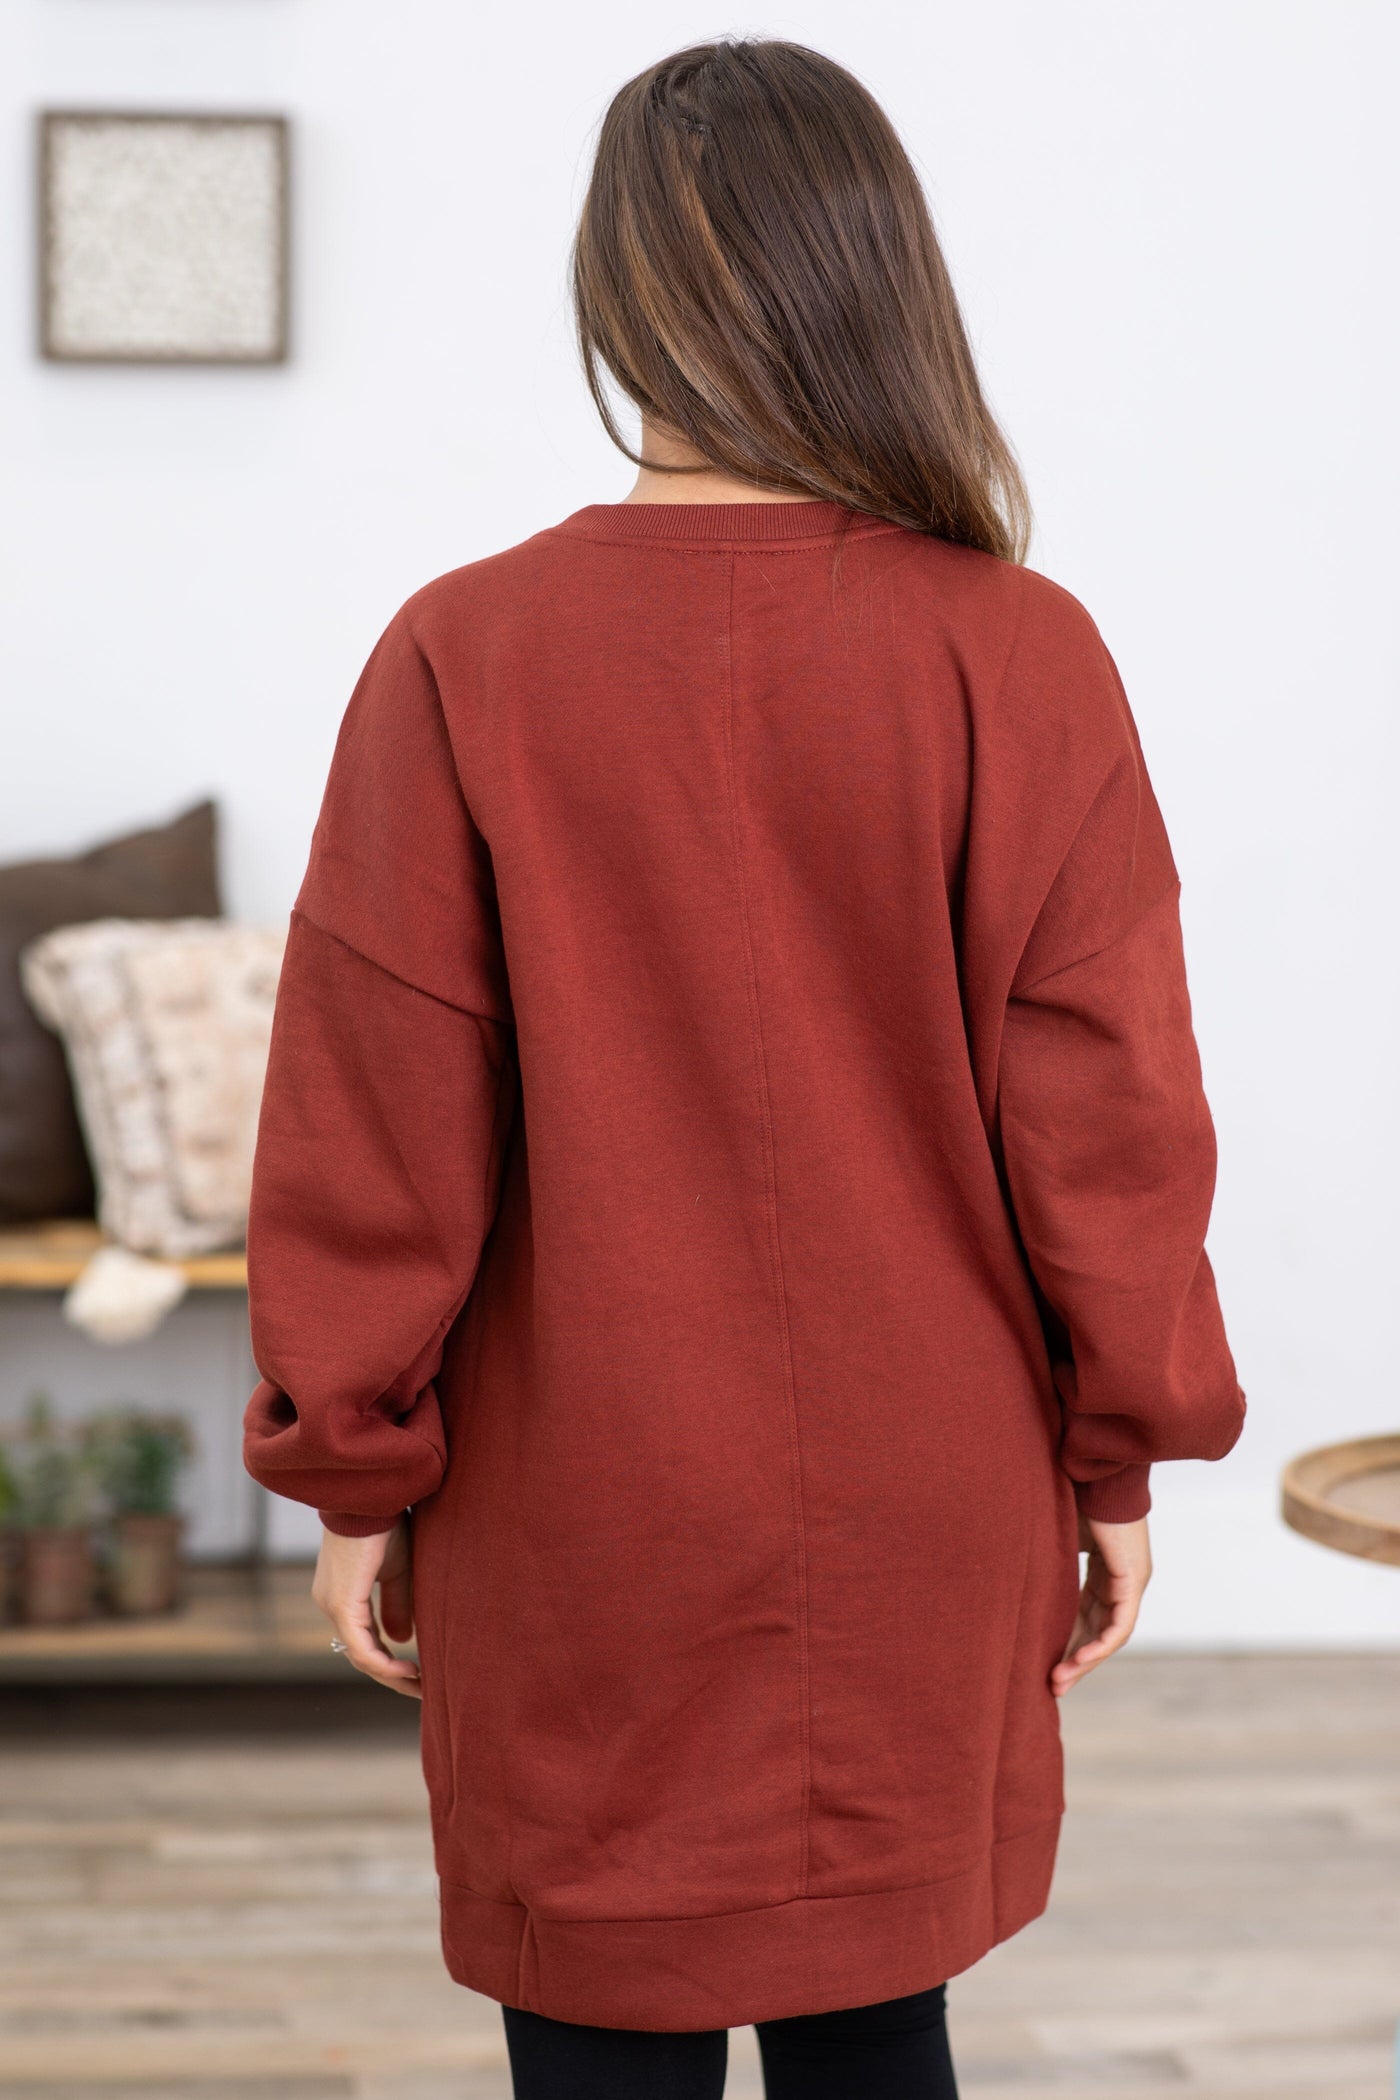 Rust Tunic Length Sweatshirt With Pockets - Filly Flair